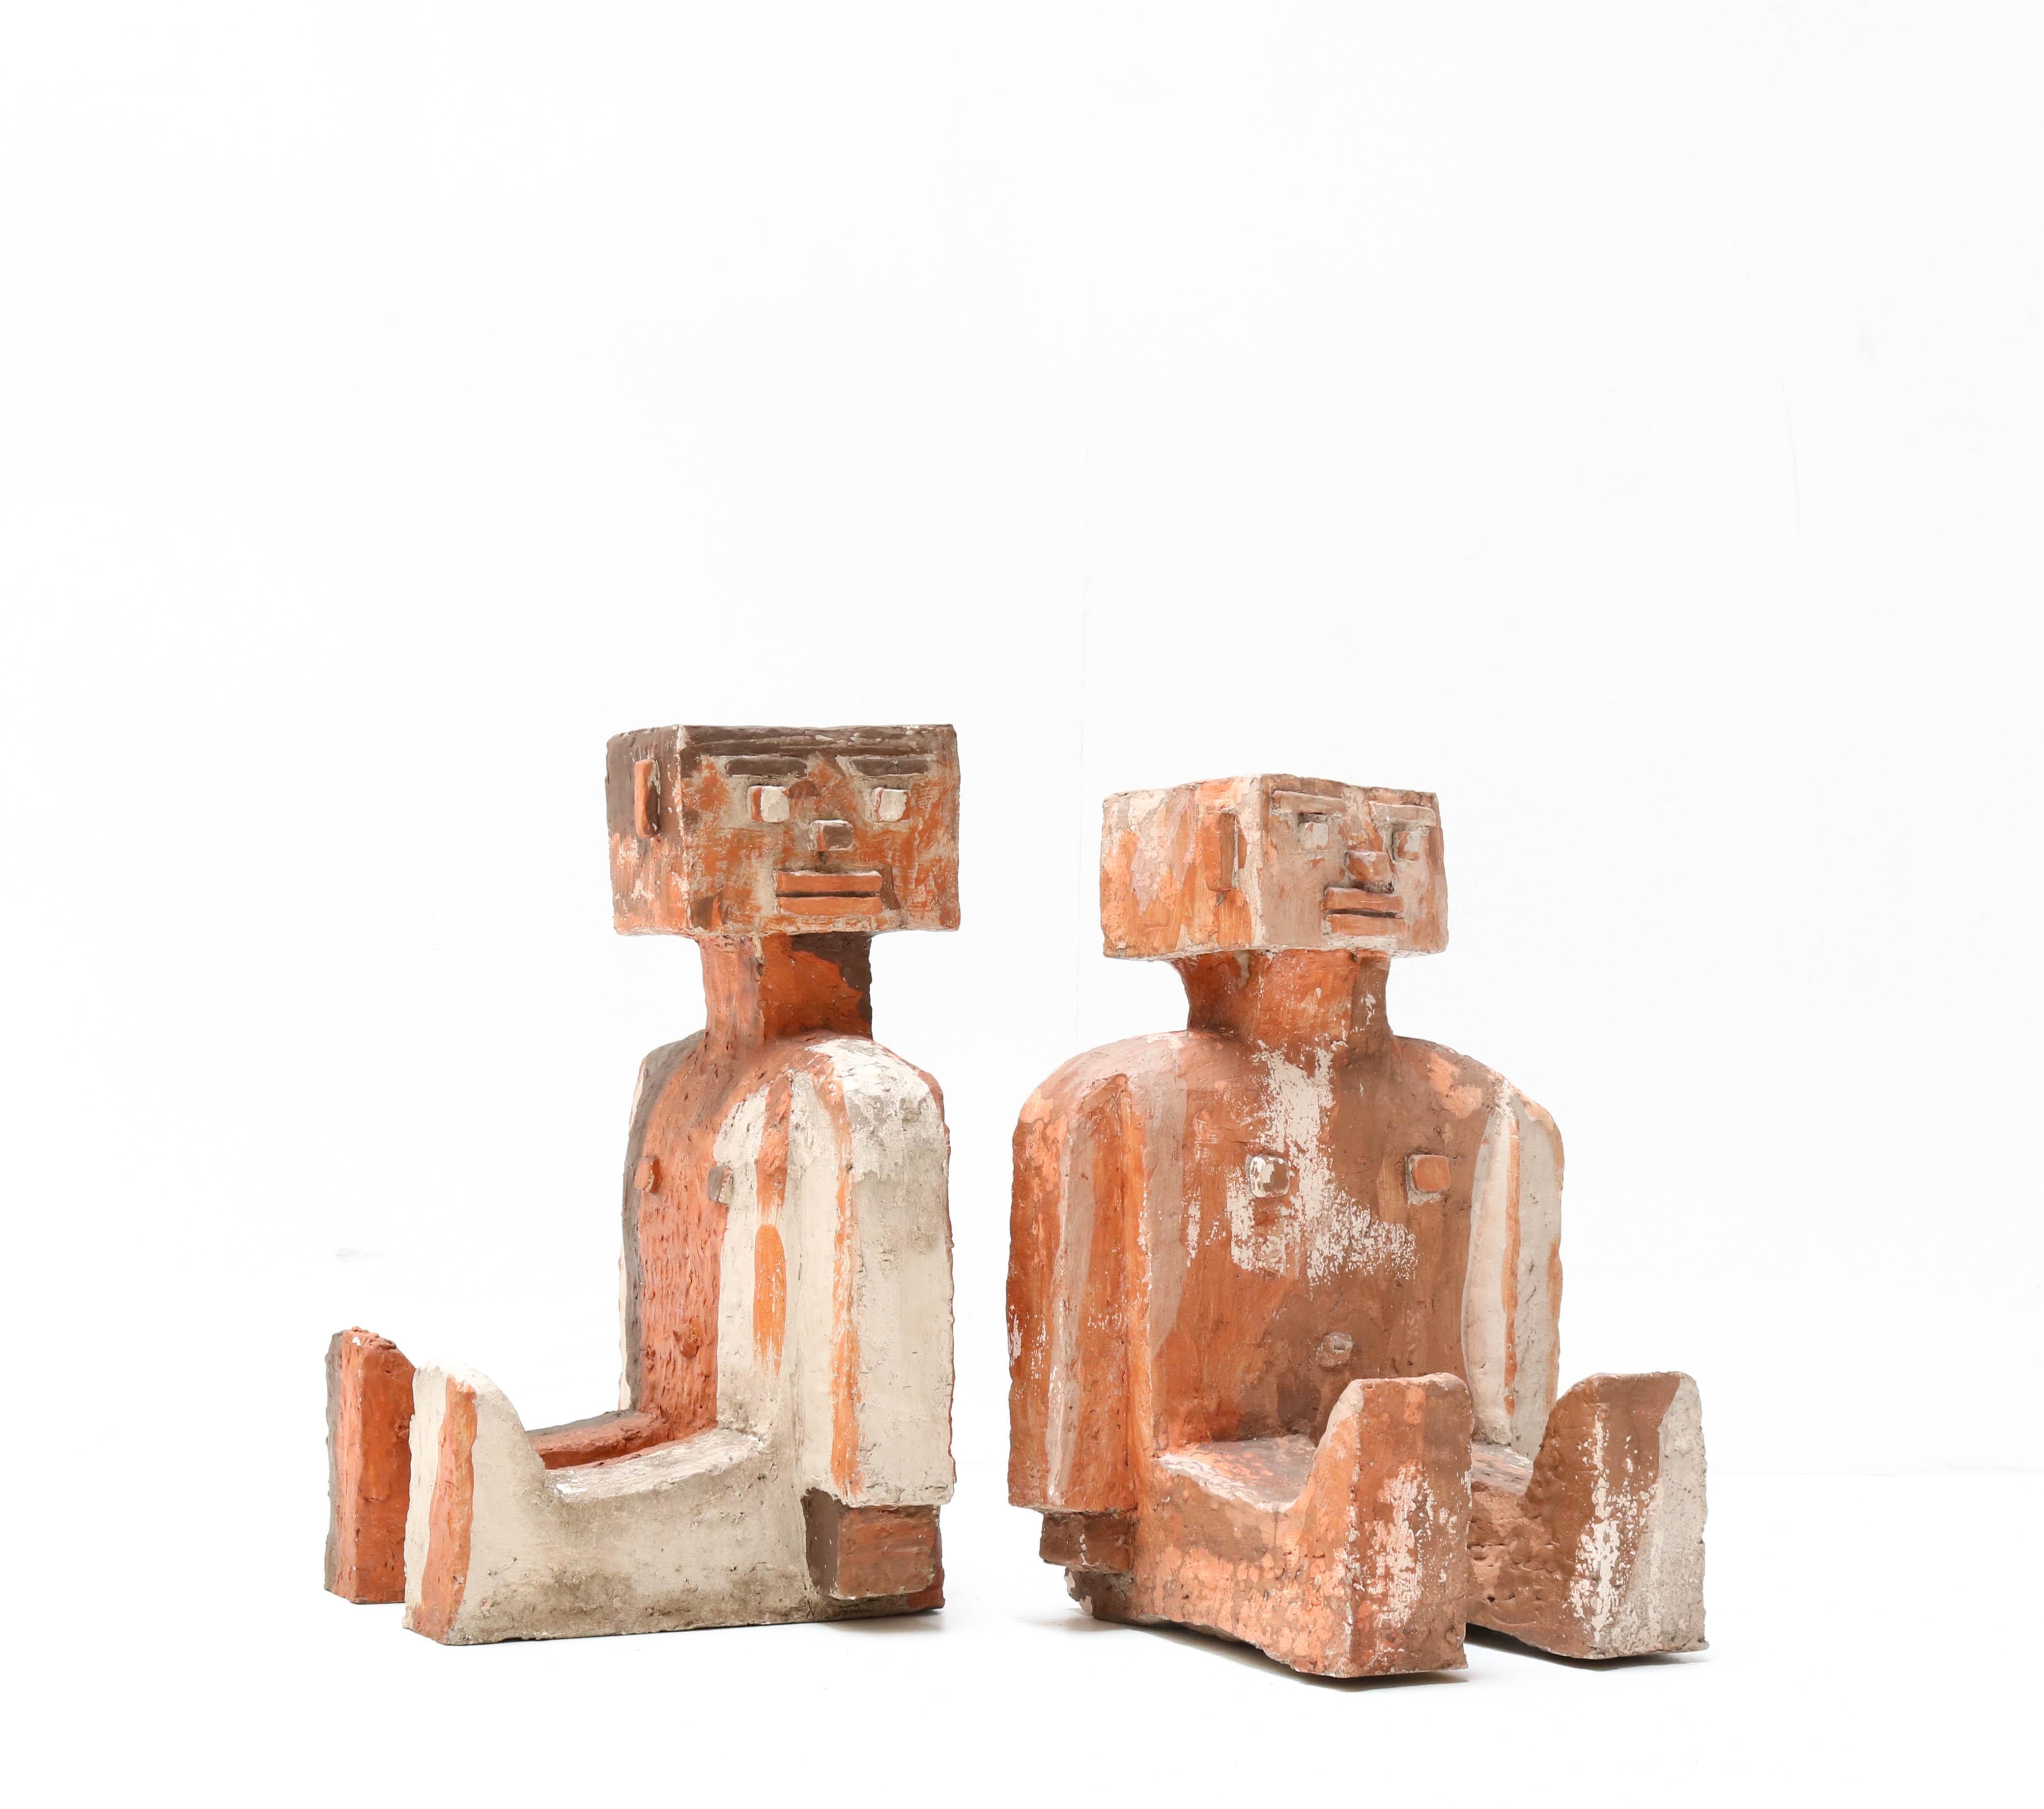 Stunning pair of modernist abstract sculptures.
Striking Dutch design from the 1970s.
This wonderful pair is made of brick.
In good original condition with a beautiful patina.